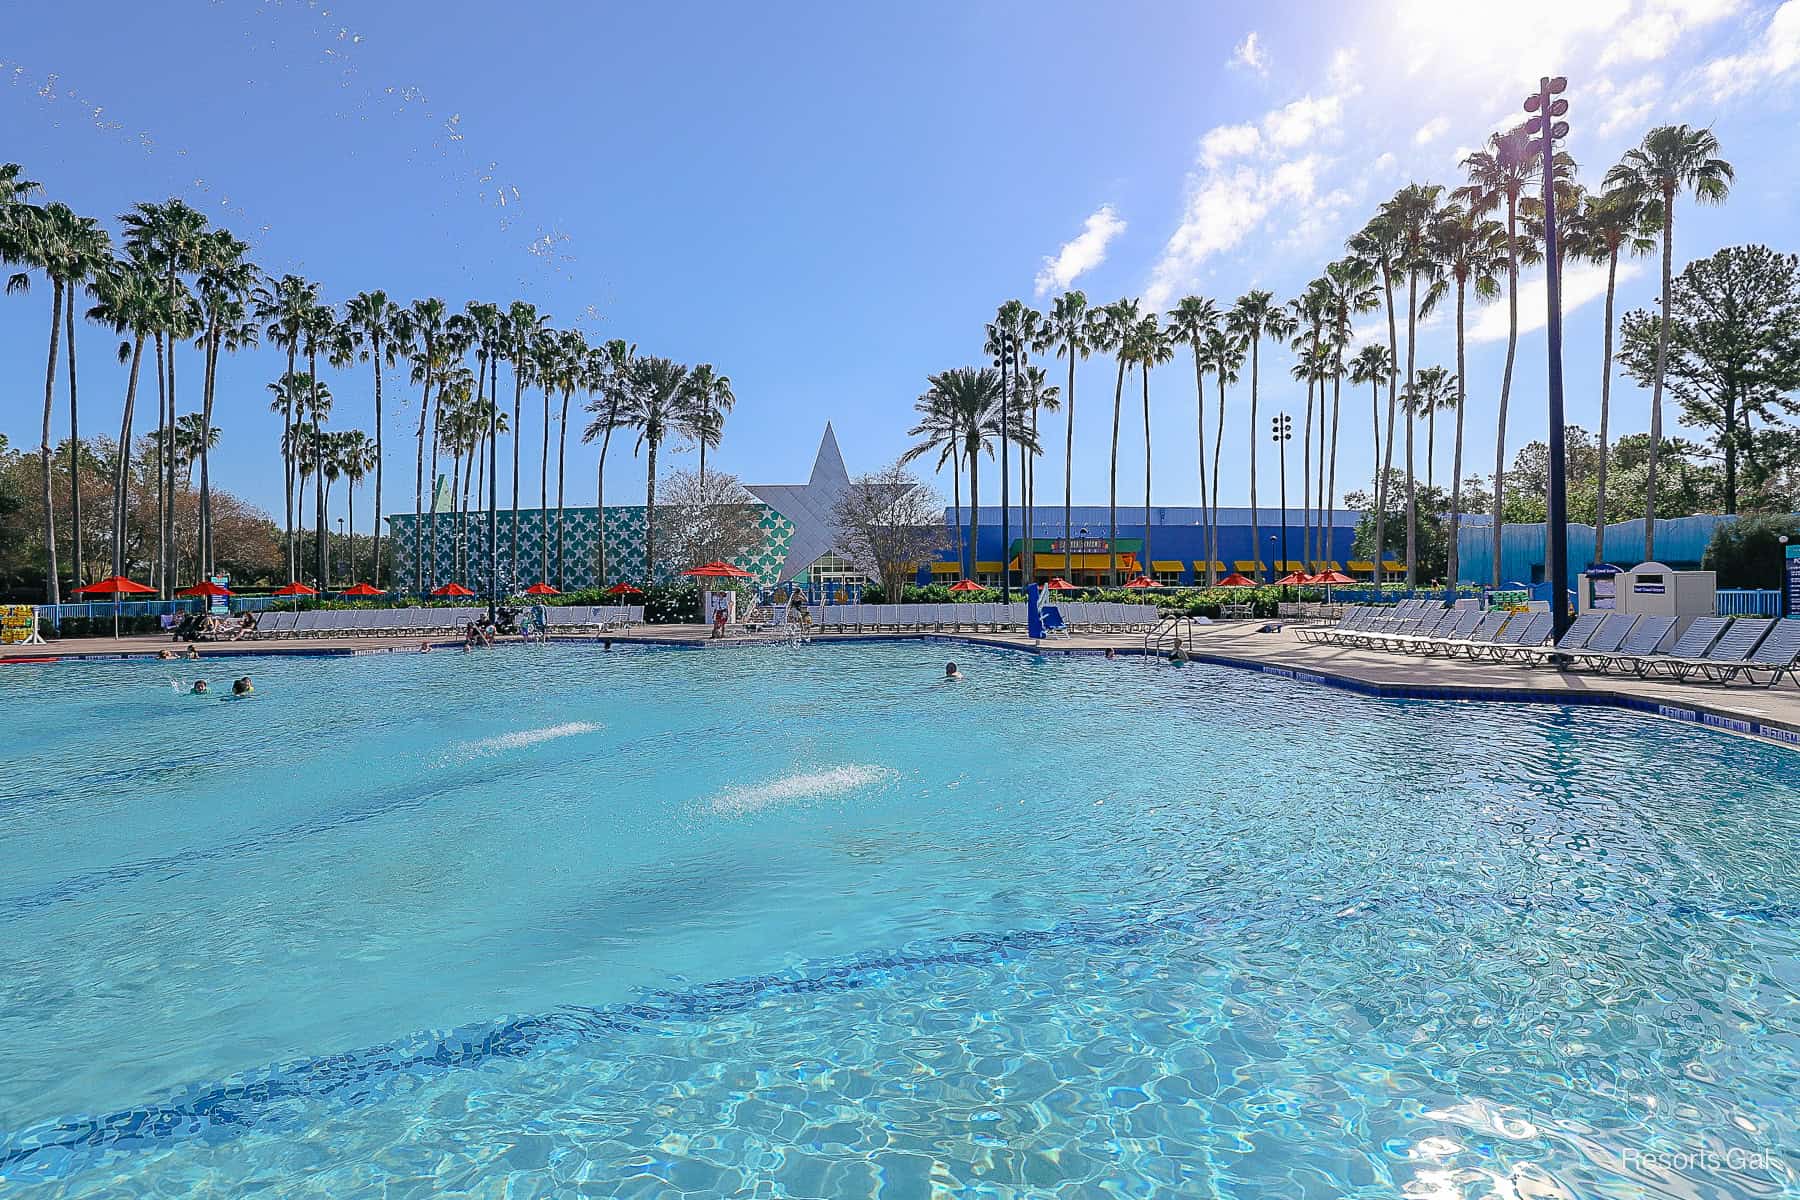 The Pool at Disney's All-Star Movies 